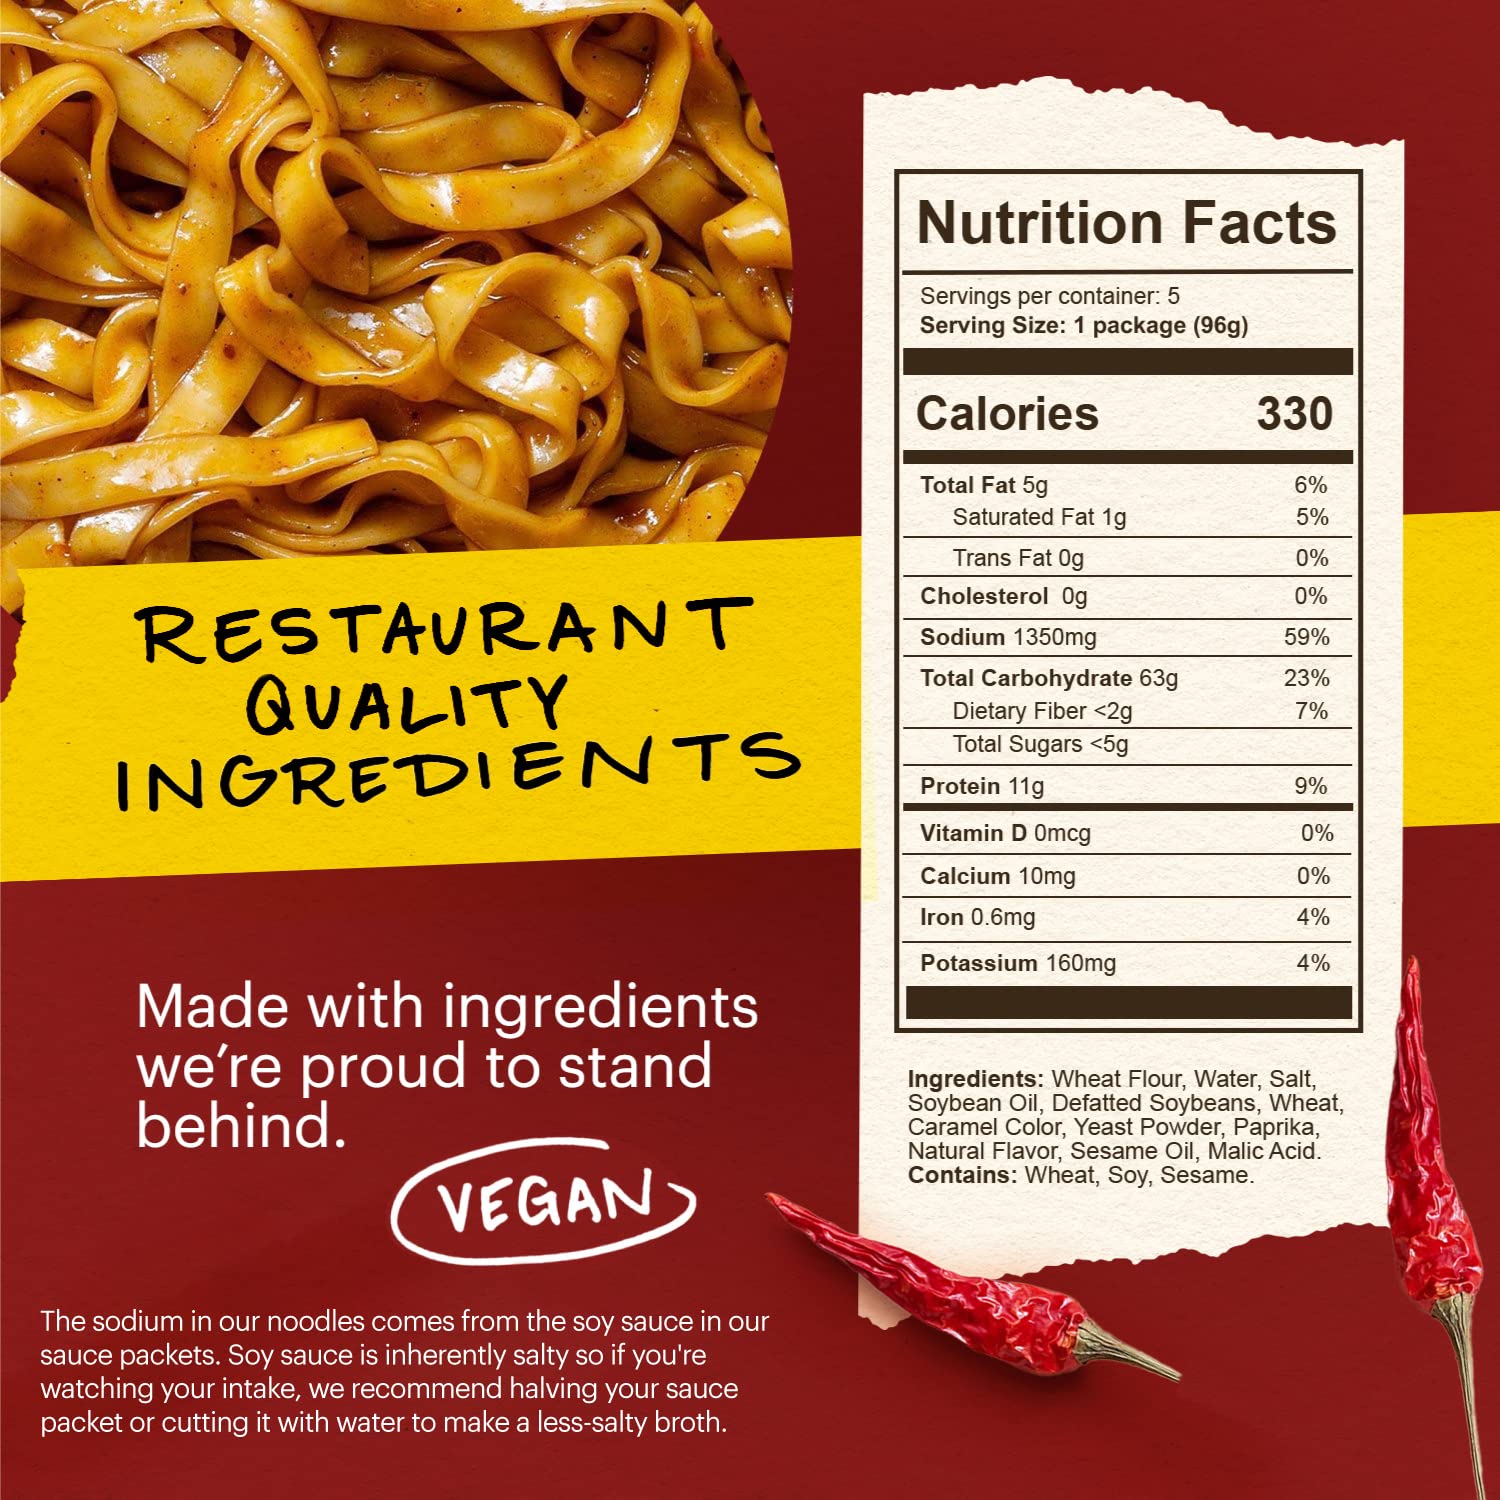 Momofuku Tingly Chili Noodles Nutrition Facts. Distributed by Alpha Omega Imports